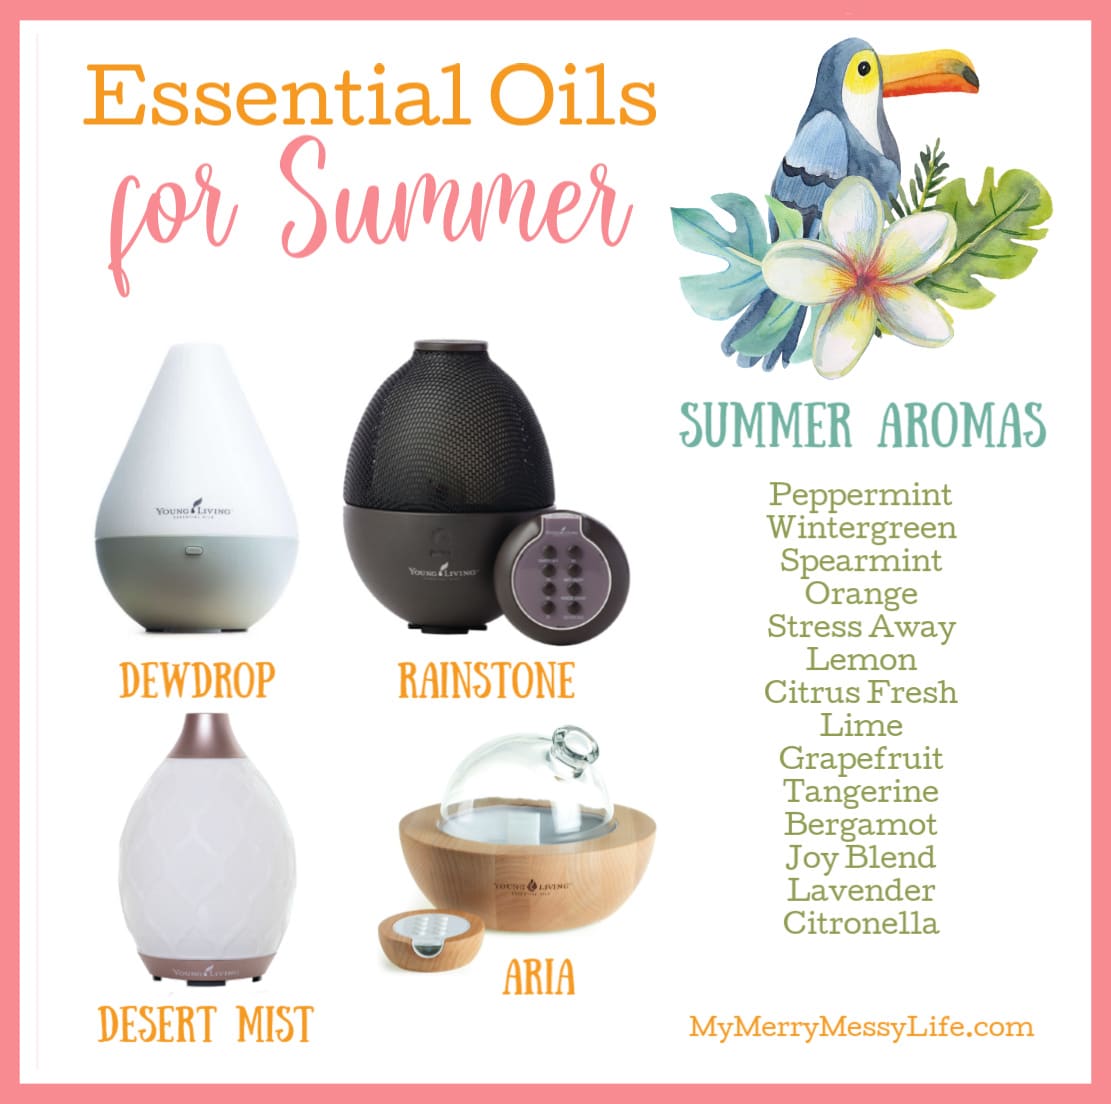 Essential Oils for Summer and Best Diffusers to Buy